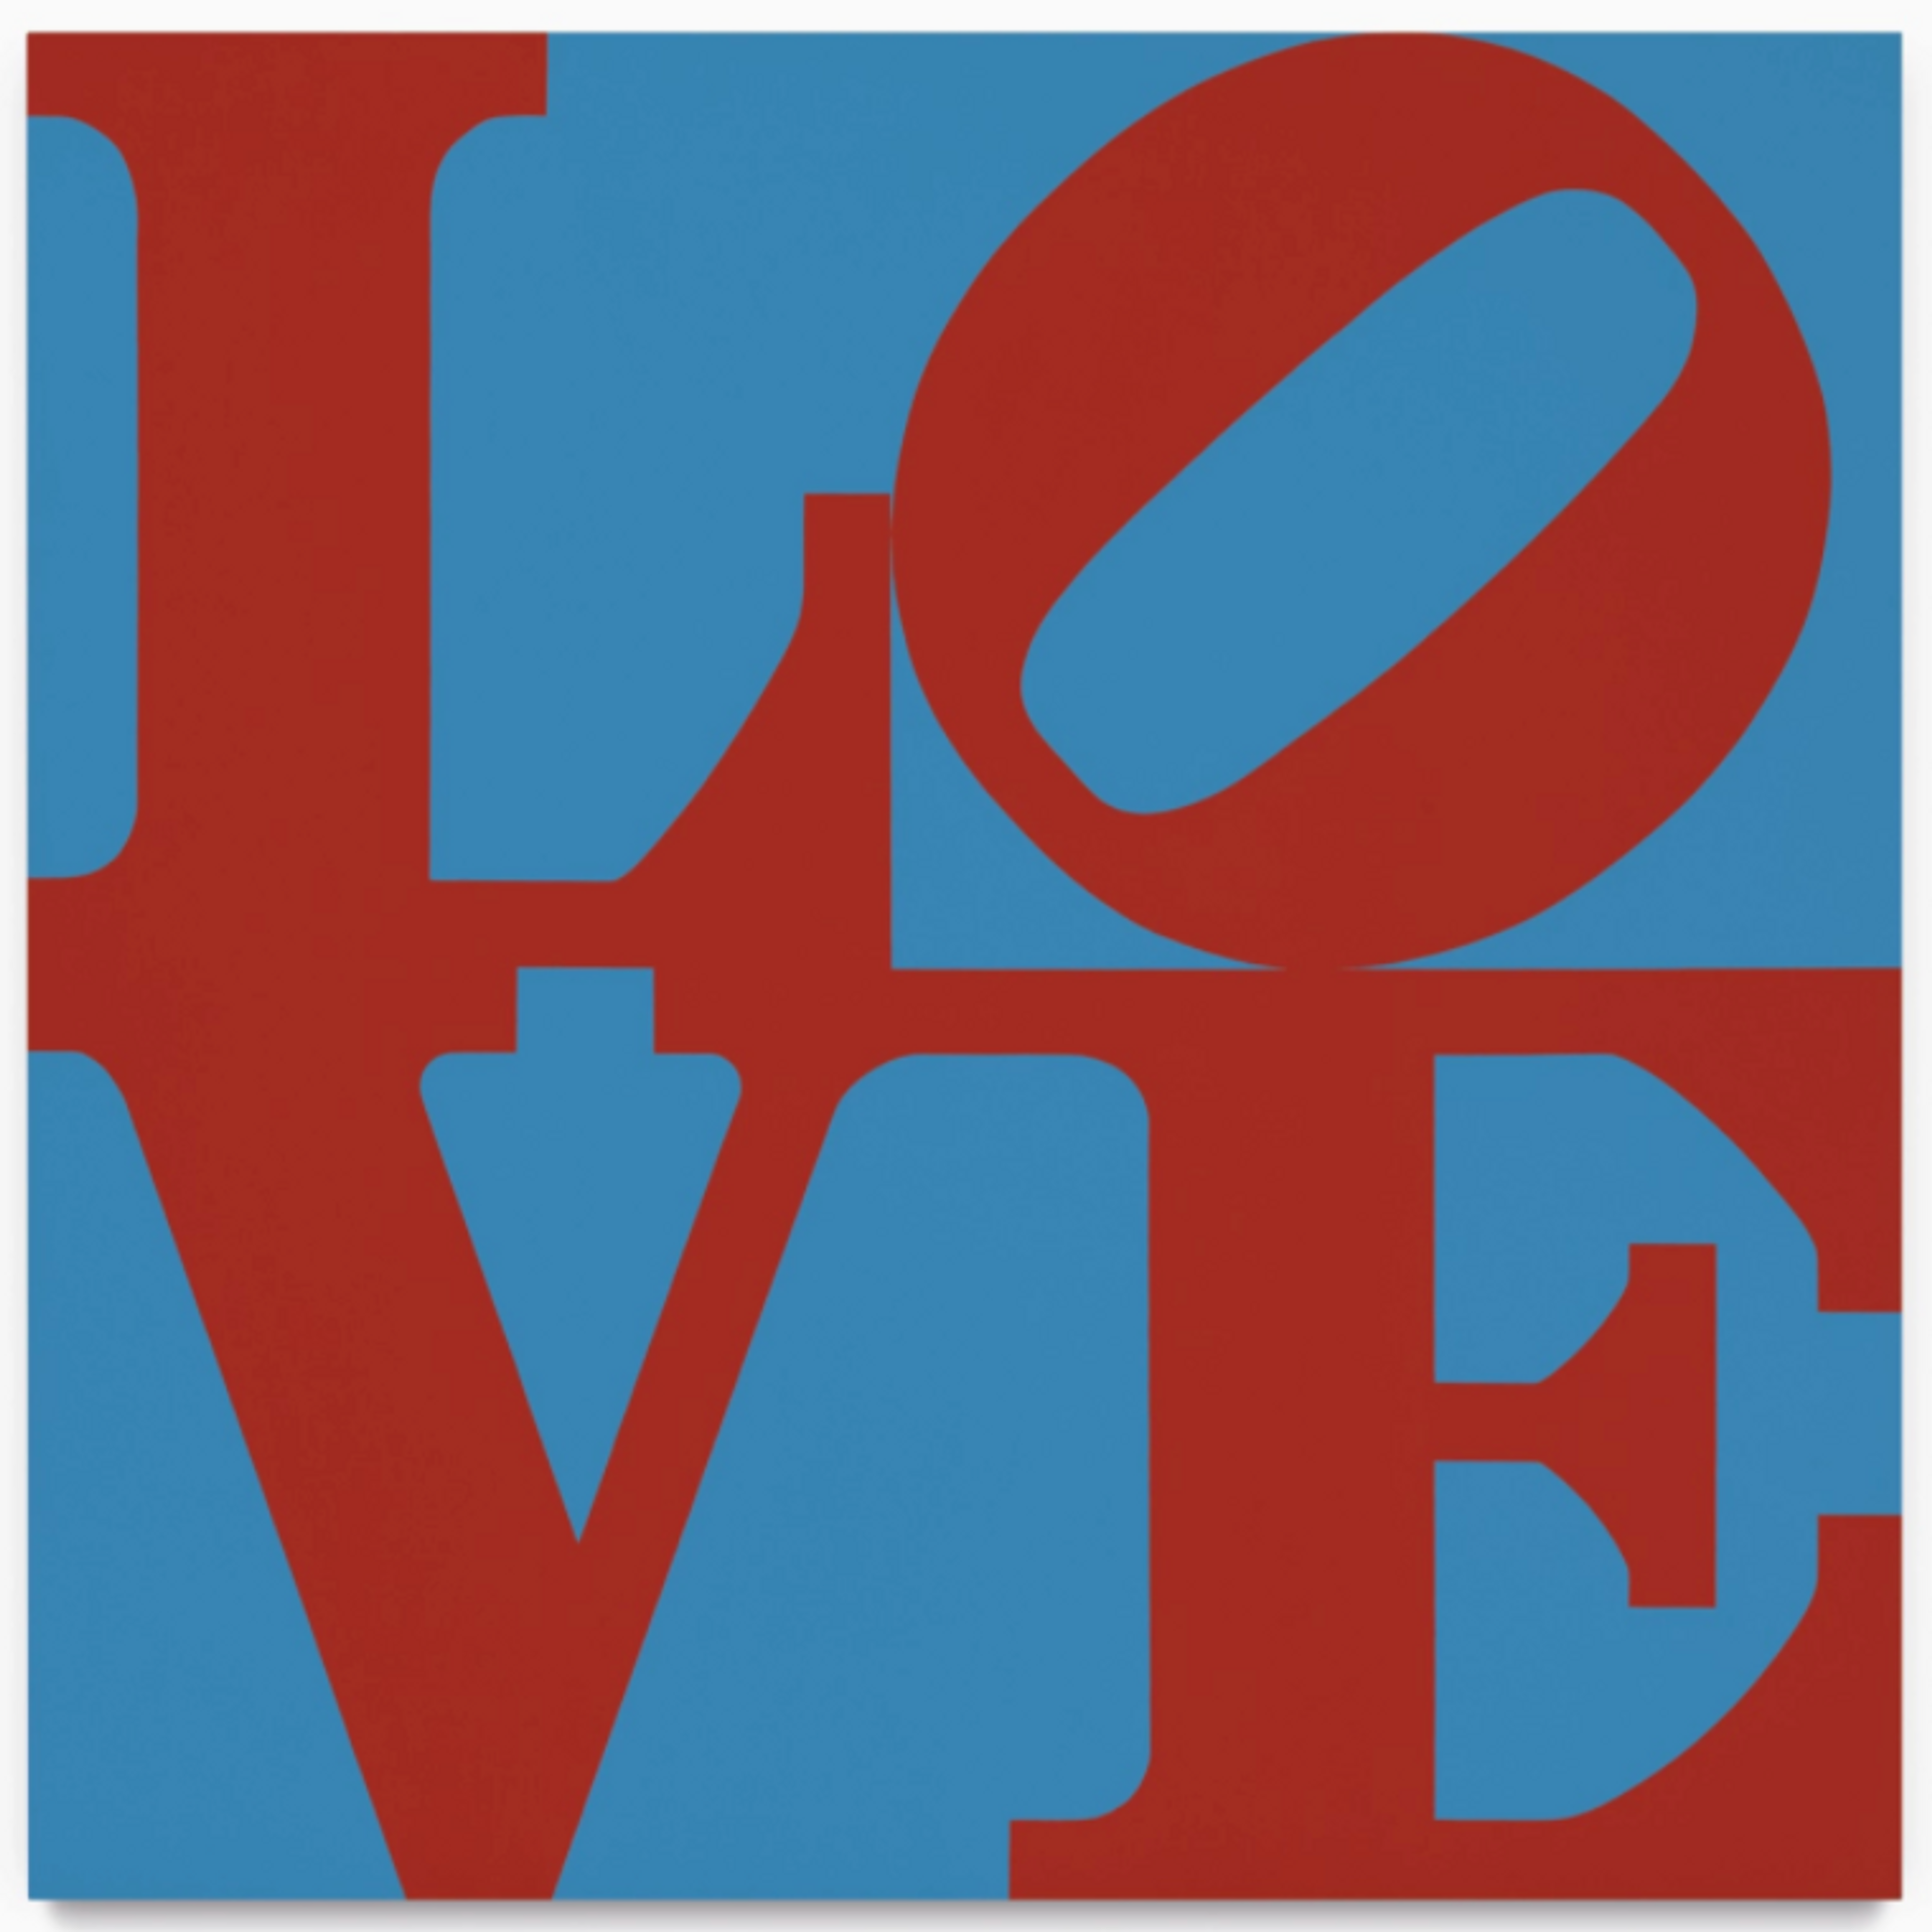 Love 1967 by Robert Indiana